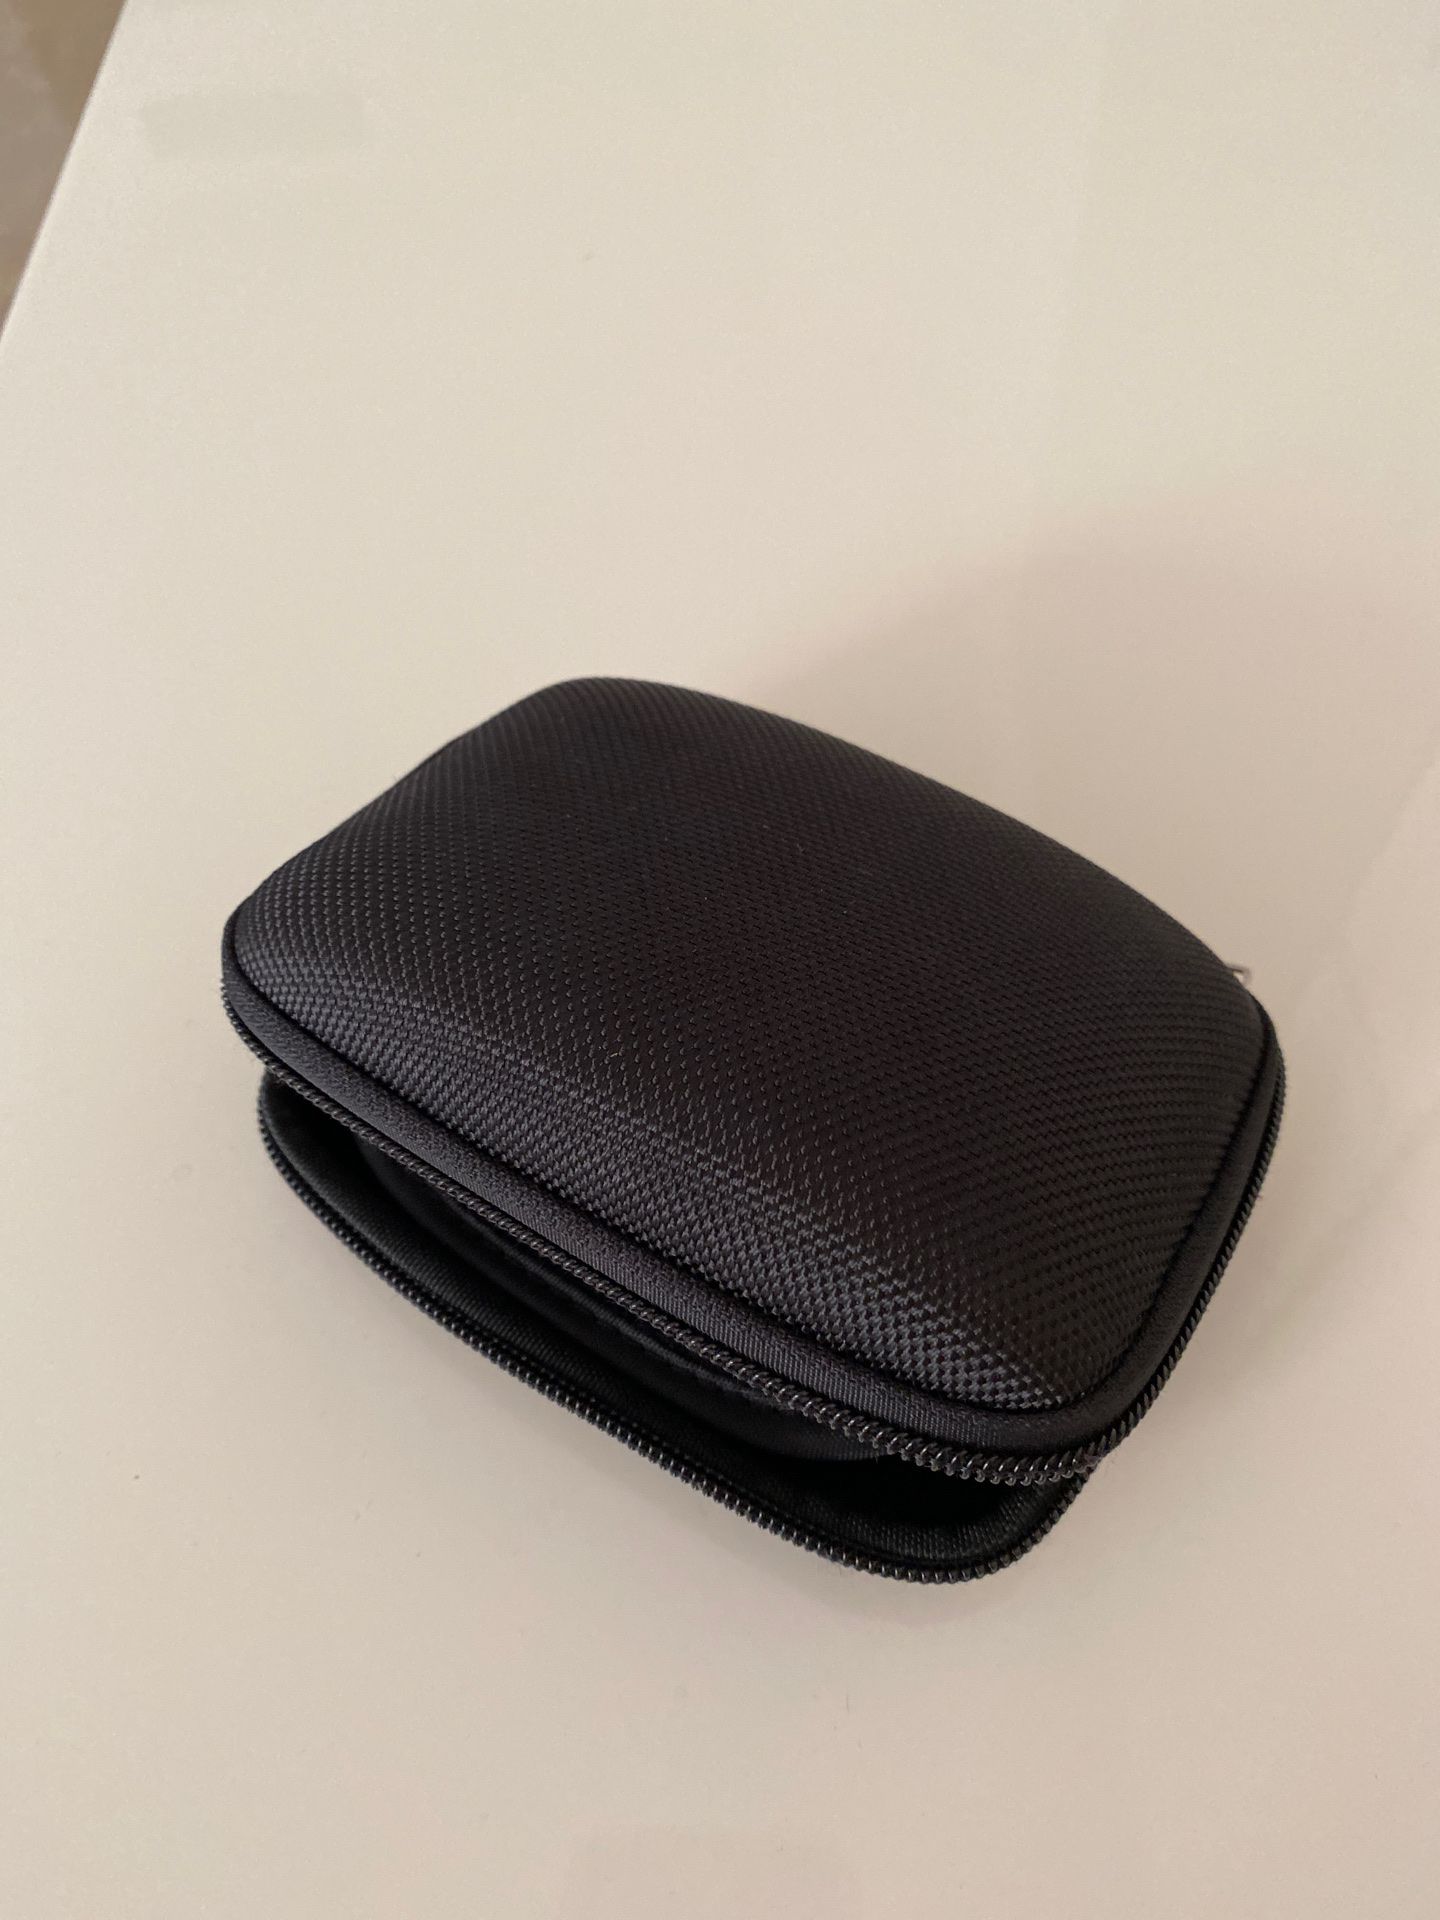 Carrying Case Pouch Storage 6x4 in